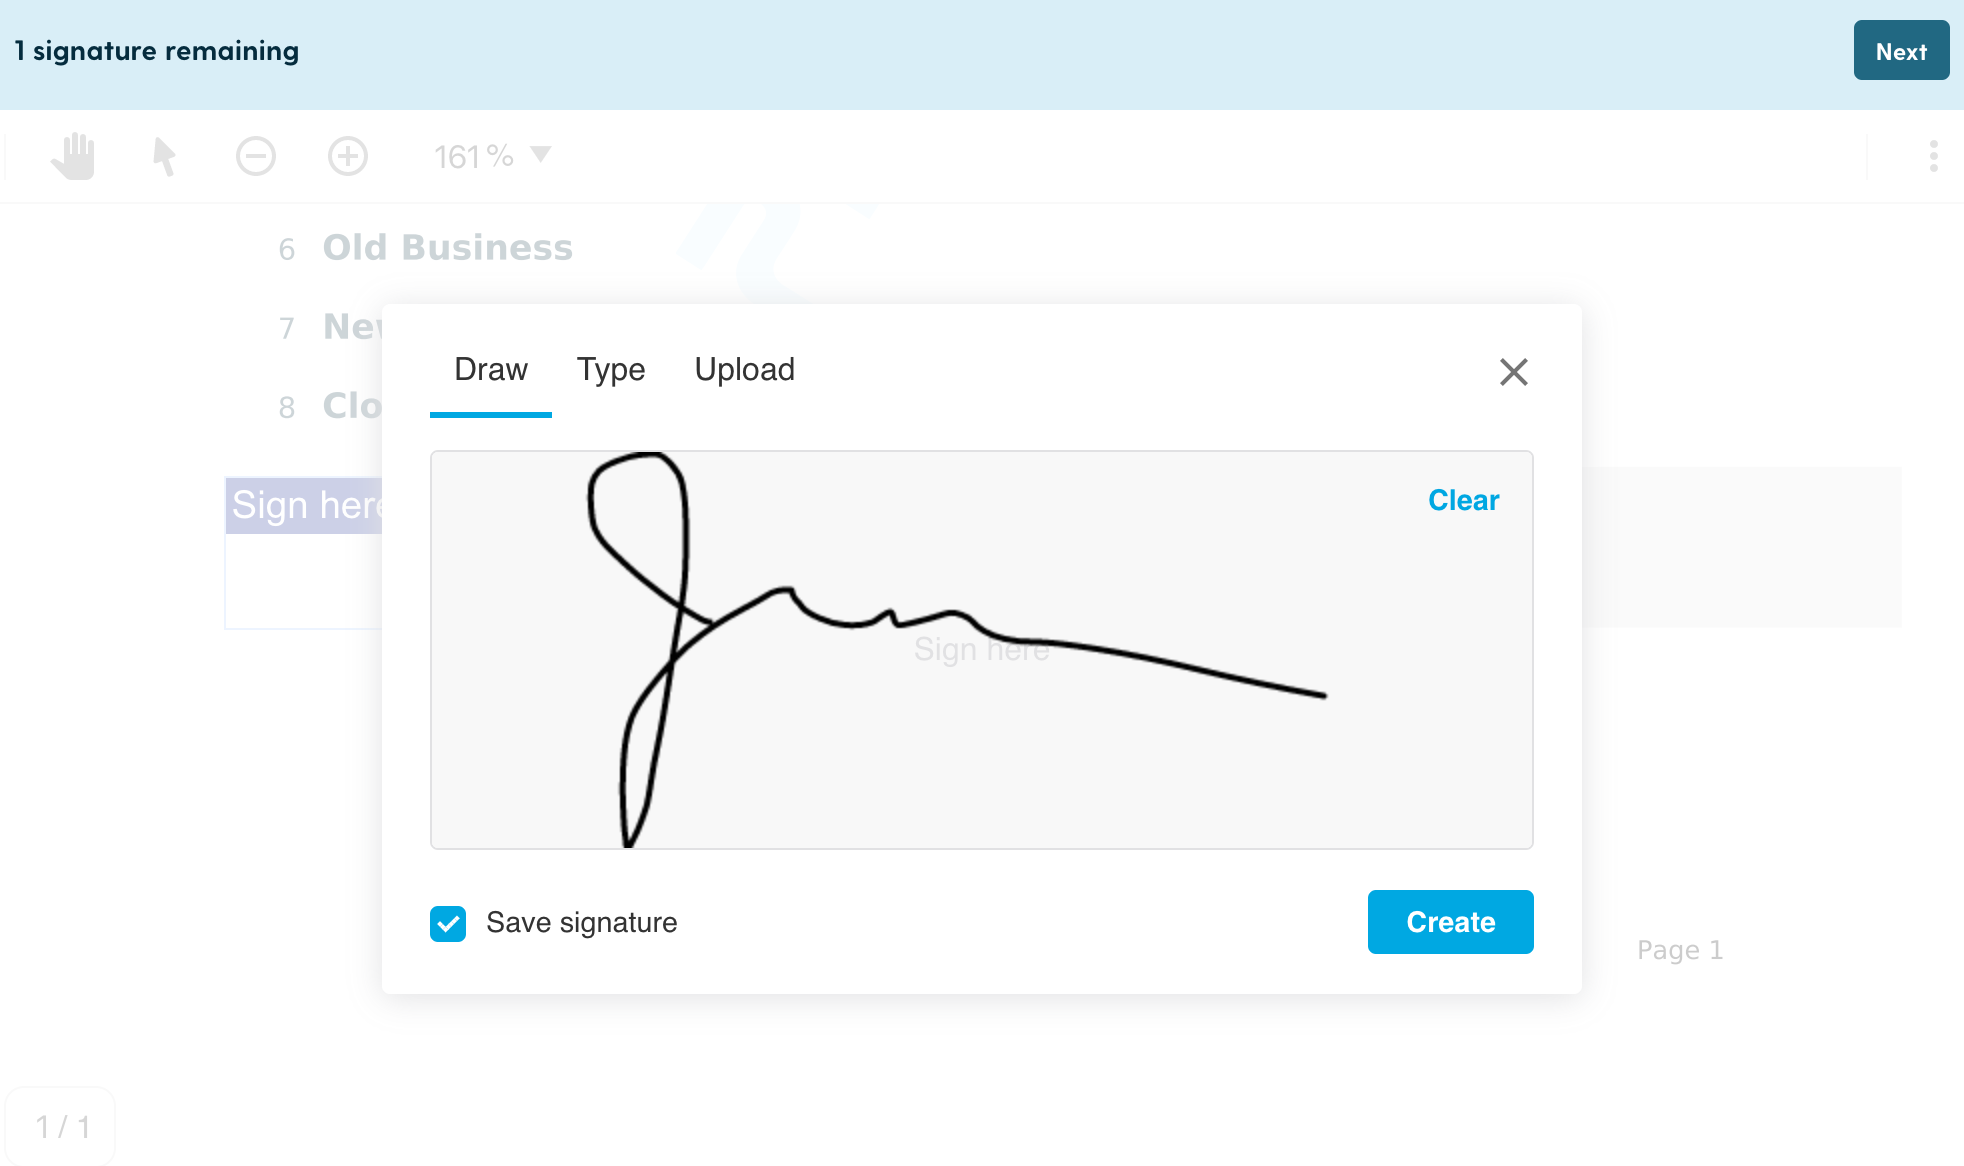 The e-signature feature in Boardable allows nonprofits to quickly obtain legal signatures in minutes.